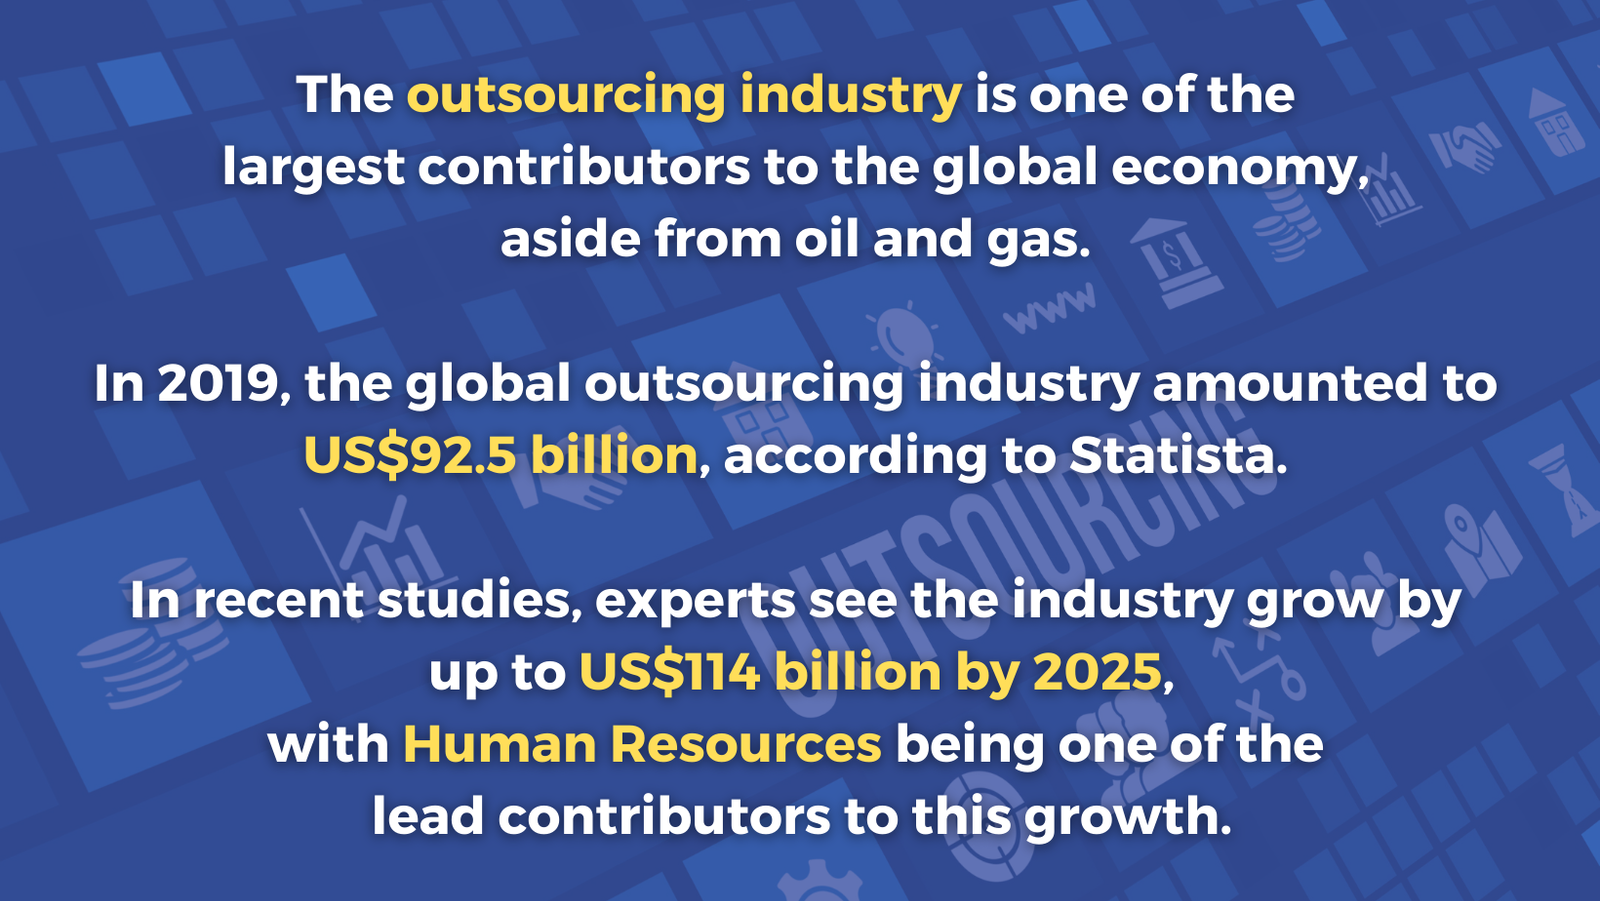 The outsourcing industry is one of the largest contributors to the global economy, aside from oil and gas. In 2019, the global outsourcing industry amounted to US$92.5 billion, according to Statista. In recent studies, experts see the industry grow by up to US$114 billion by 2025, with Human Resources being one of the lead contributors to this growth.